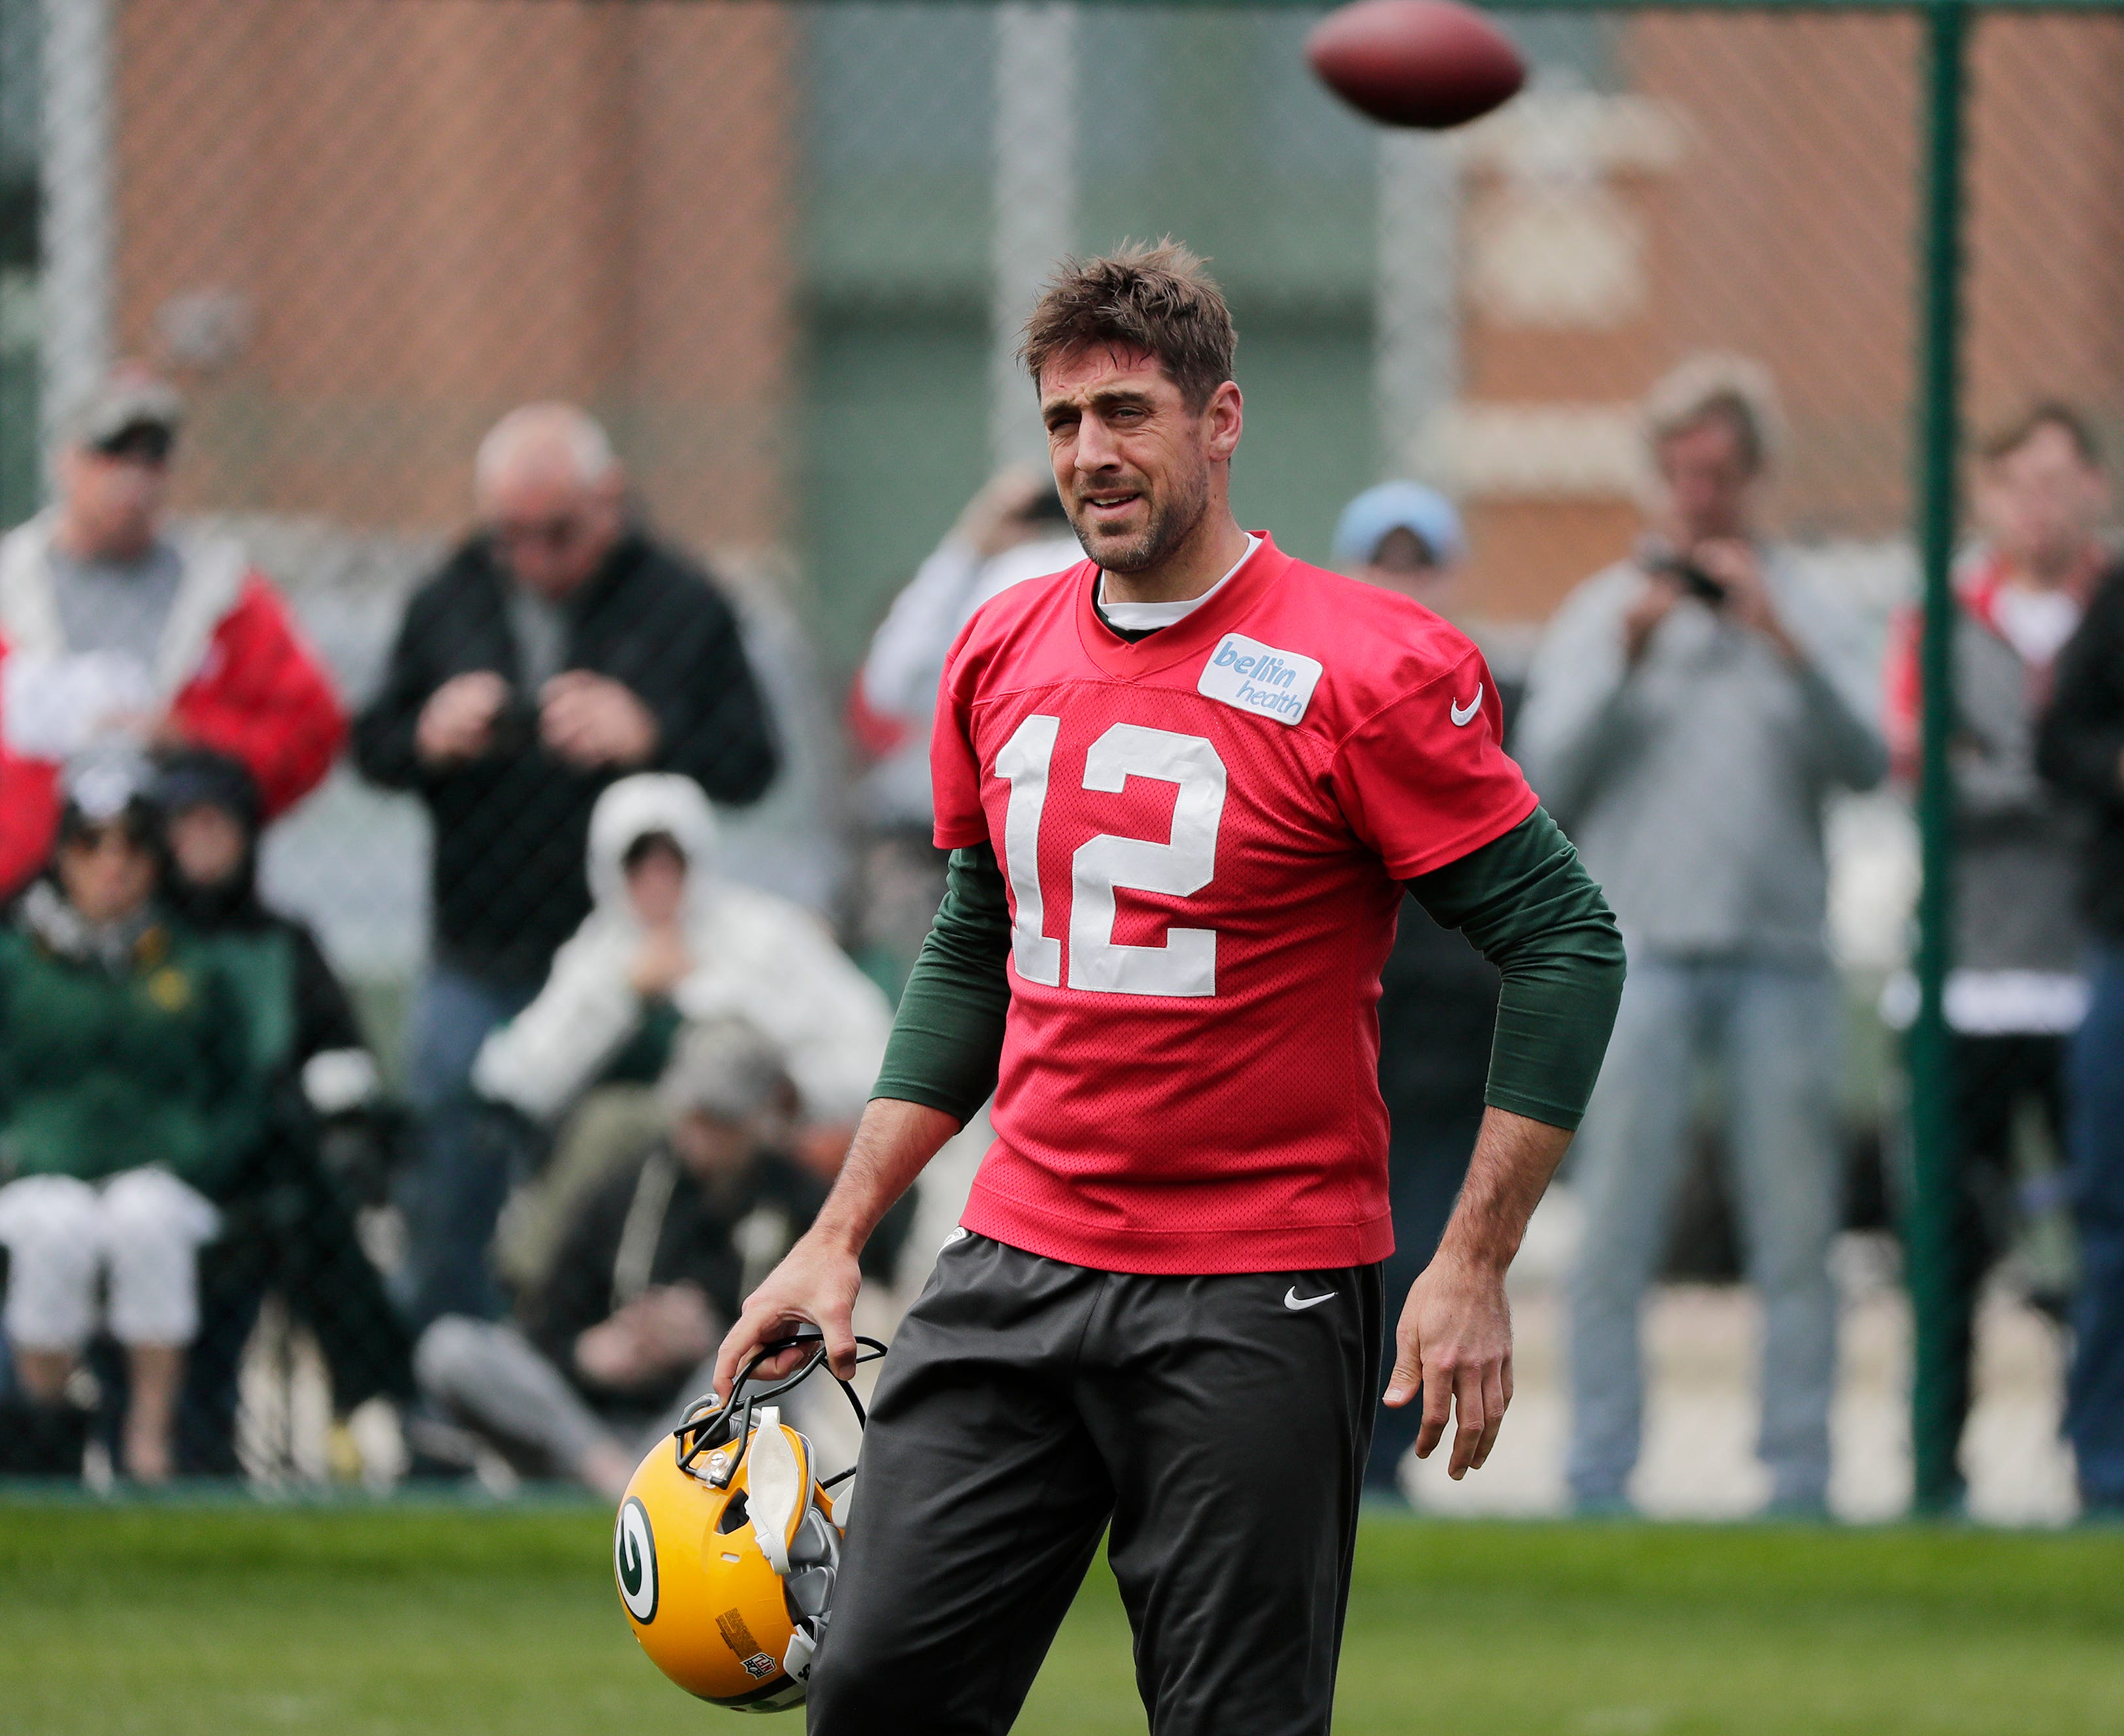 rodgers practice jersey